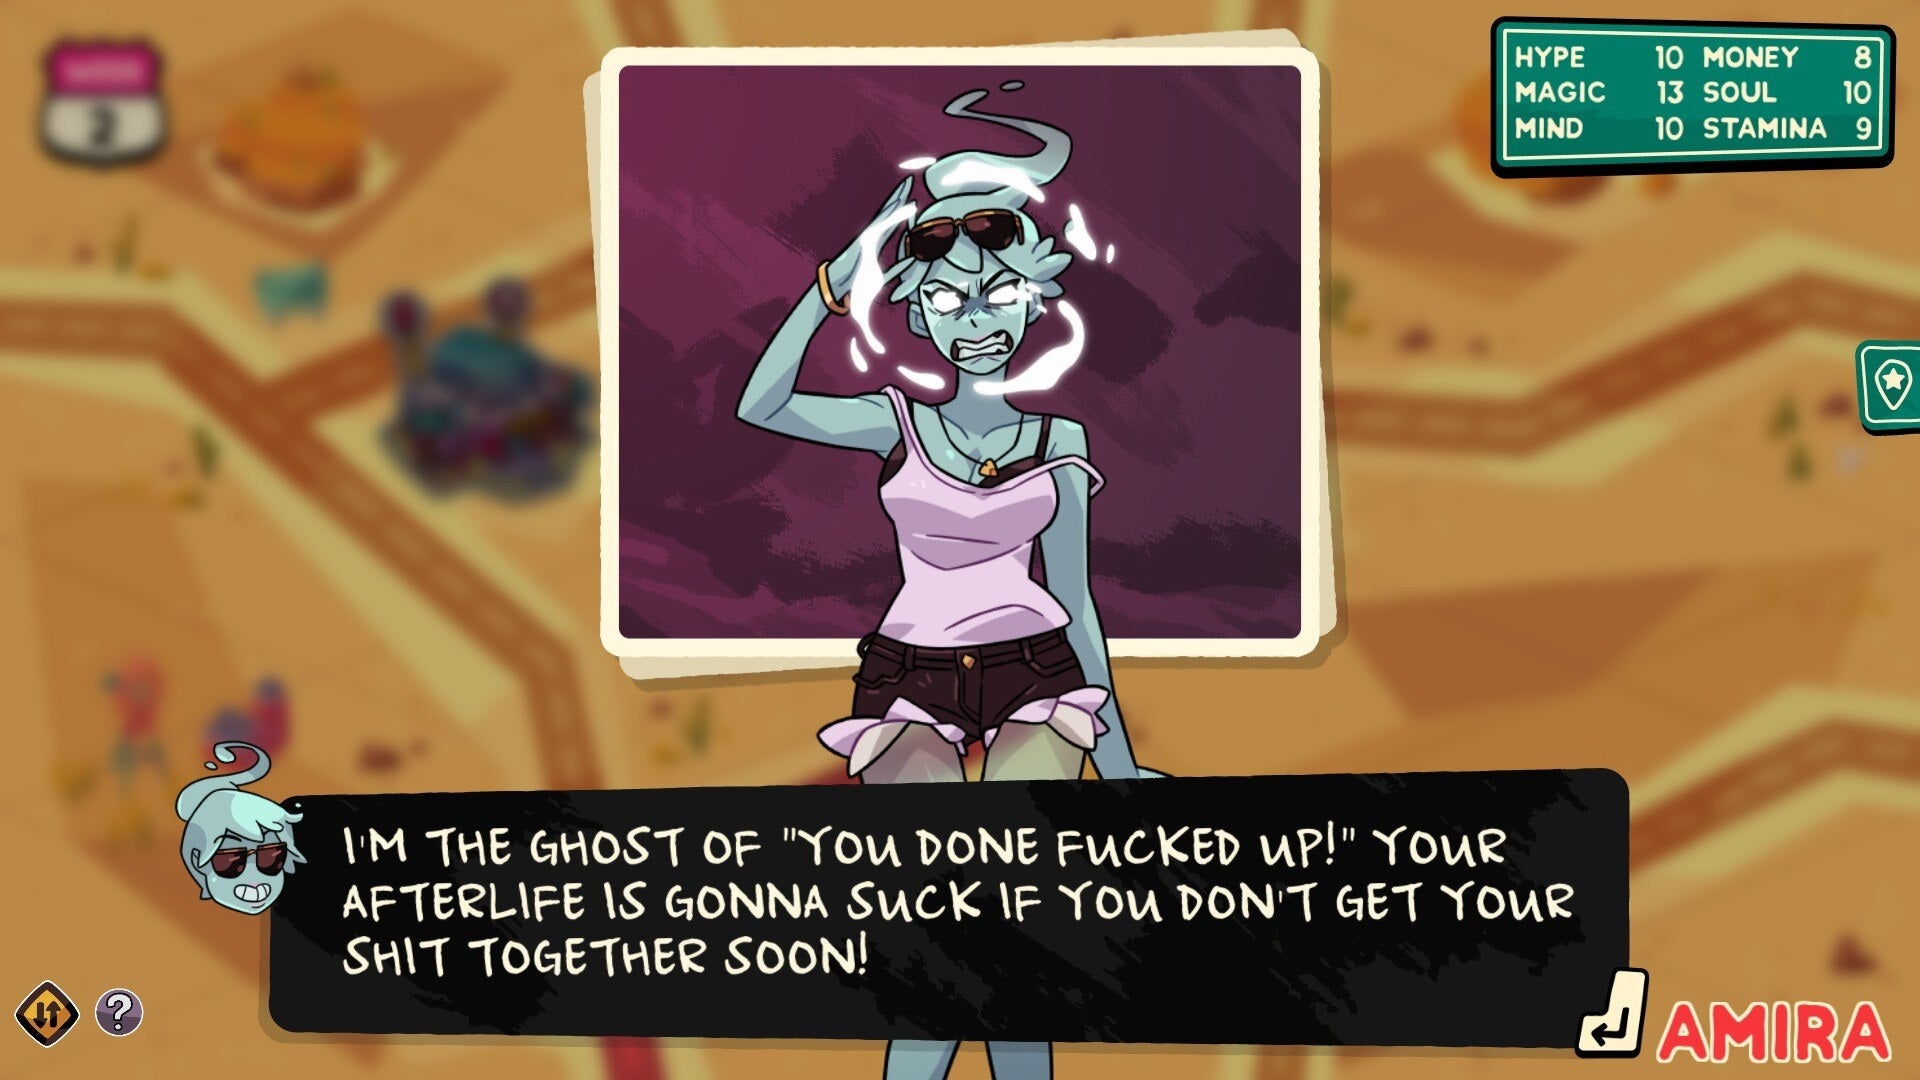 In Monster Prom 3, Polly channels the ghosts from A Christmas Carol with her own version "the ghost of you done fucked up".